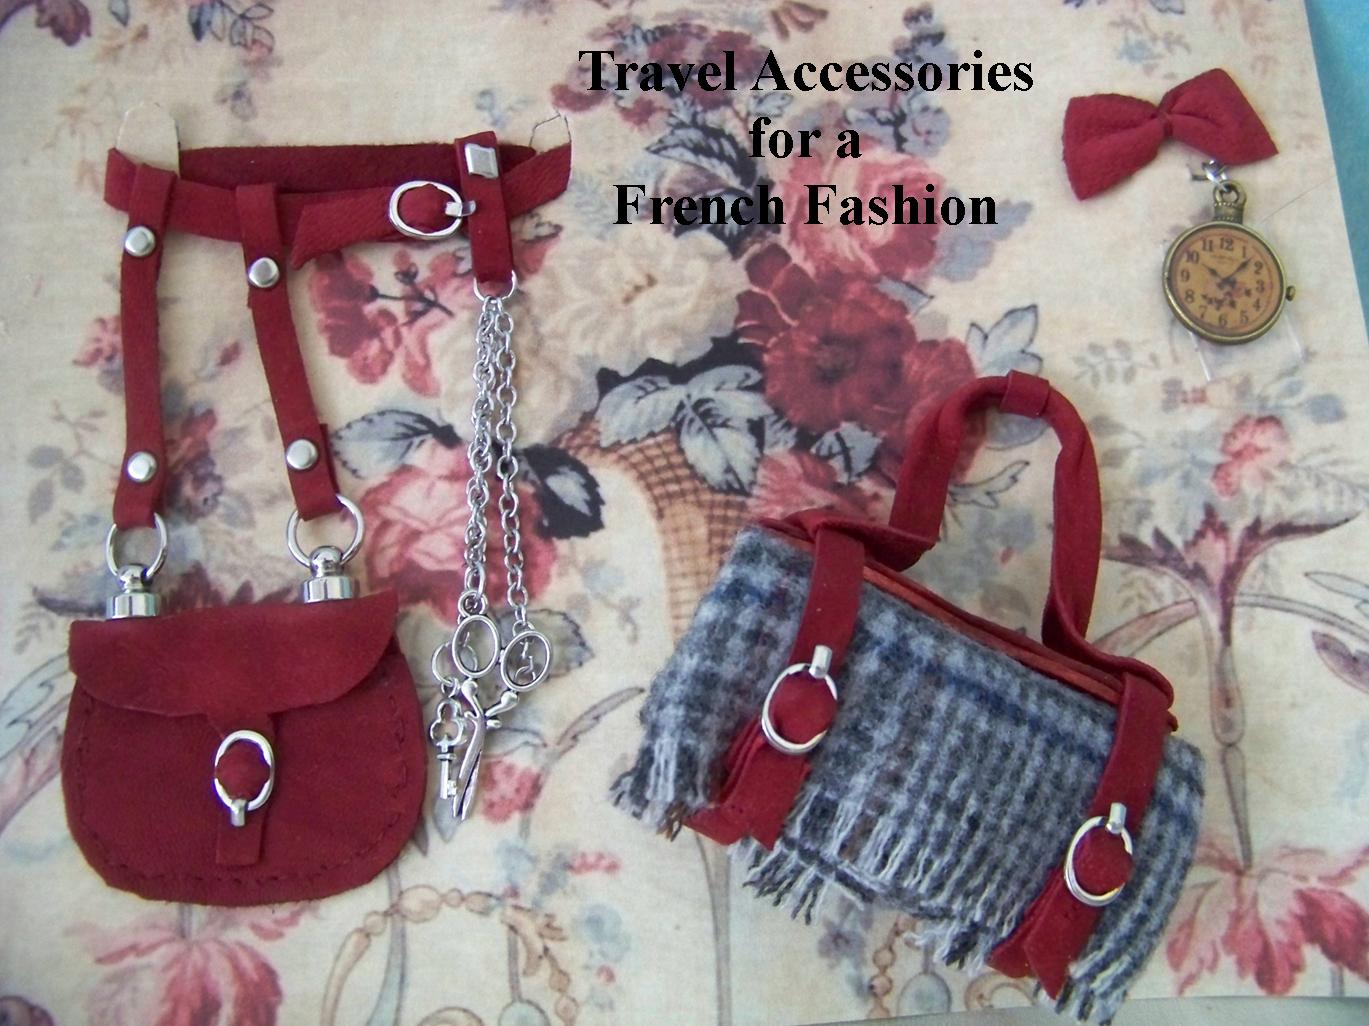 Travel Accessories for a French Fashion